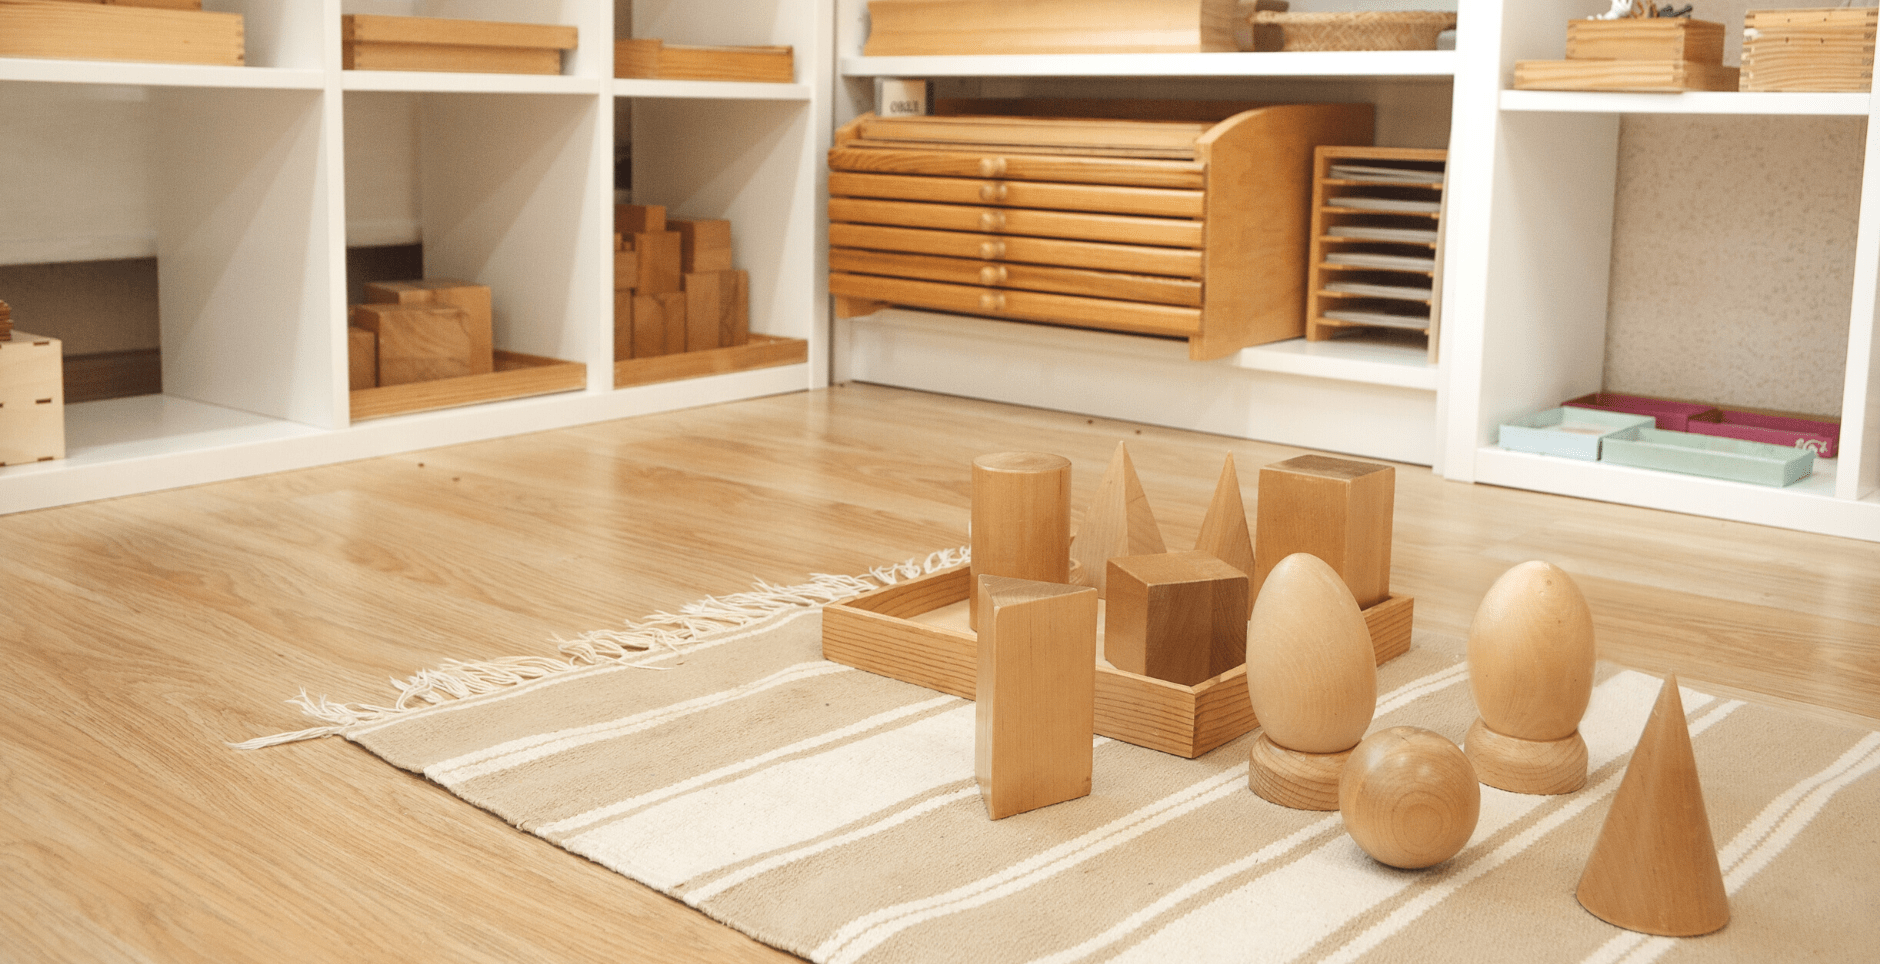 Top Four Things to Make a Great Montessori Nursery?